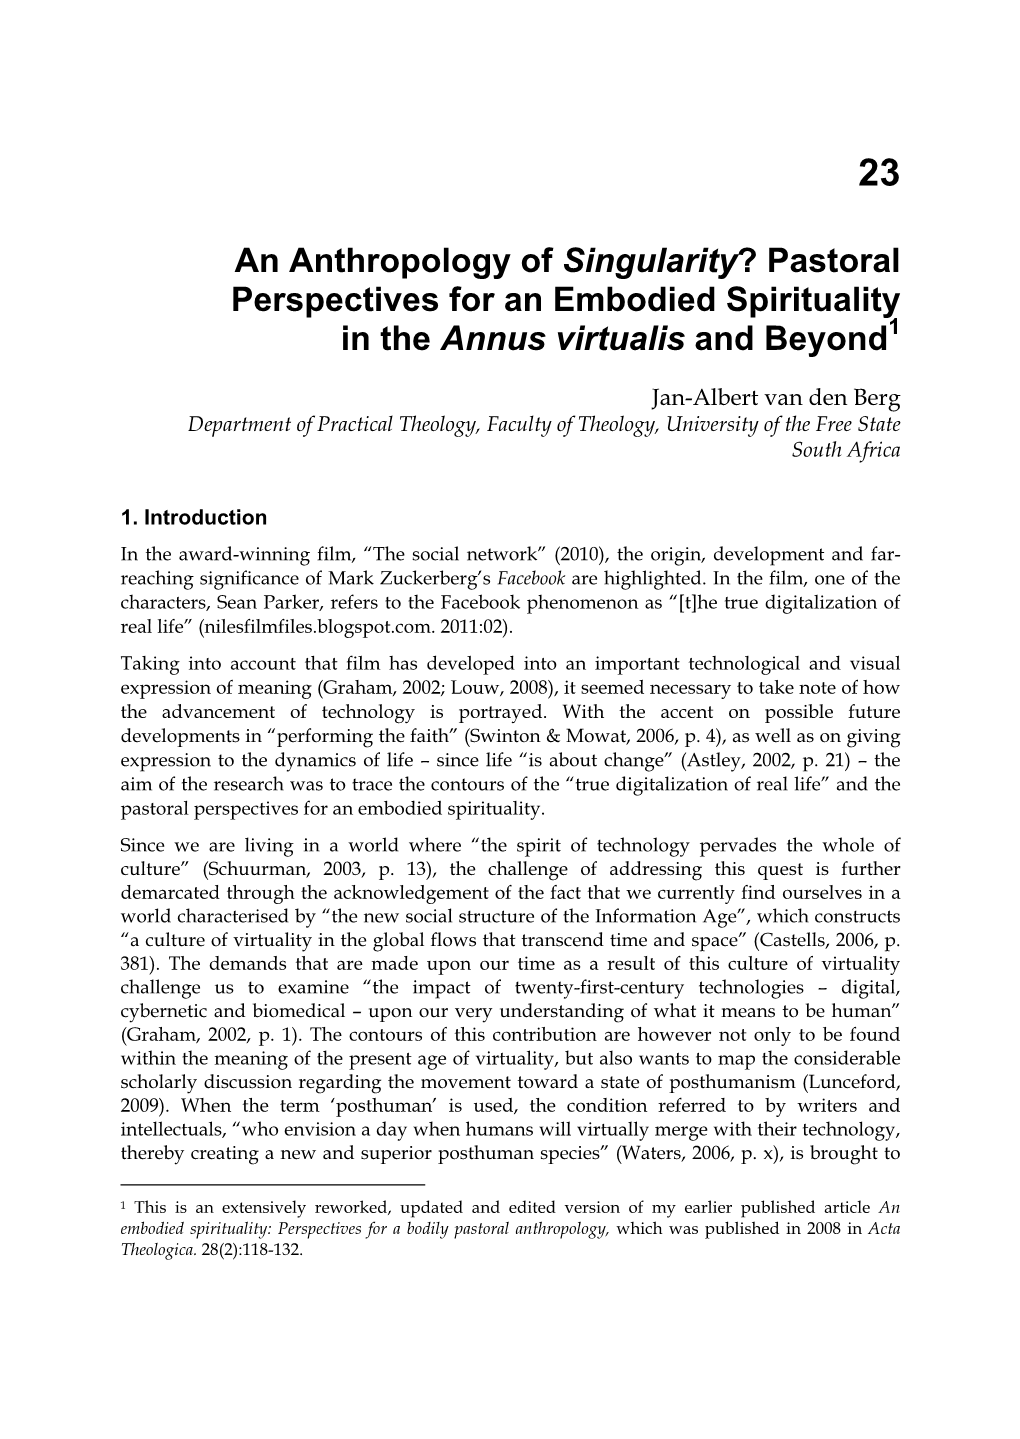 Pastoral Perspectives for an Embodied Spirituality in the Annus Virtualis and Beyond1